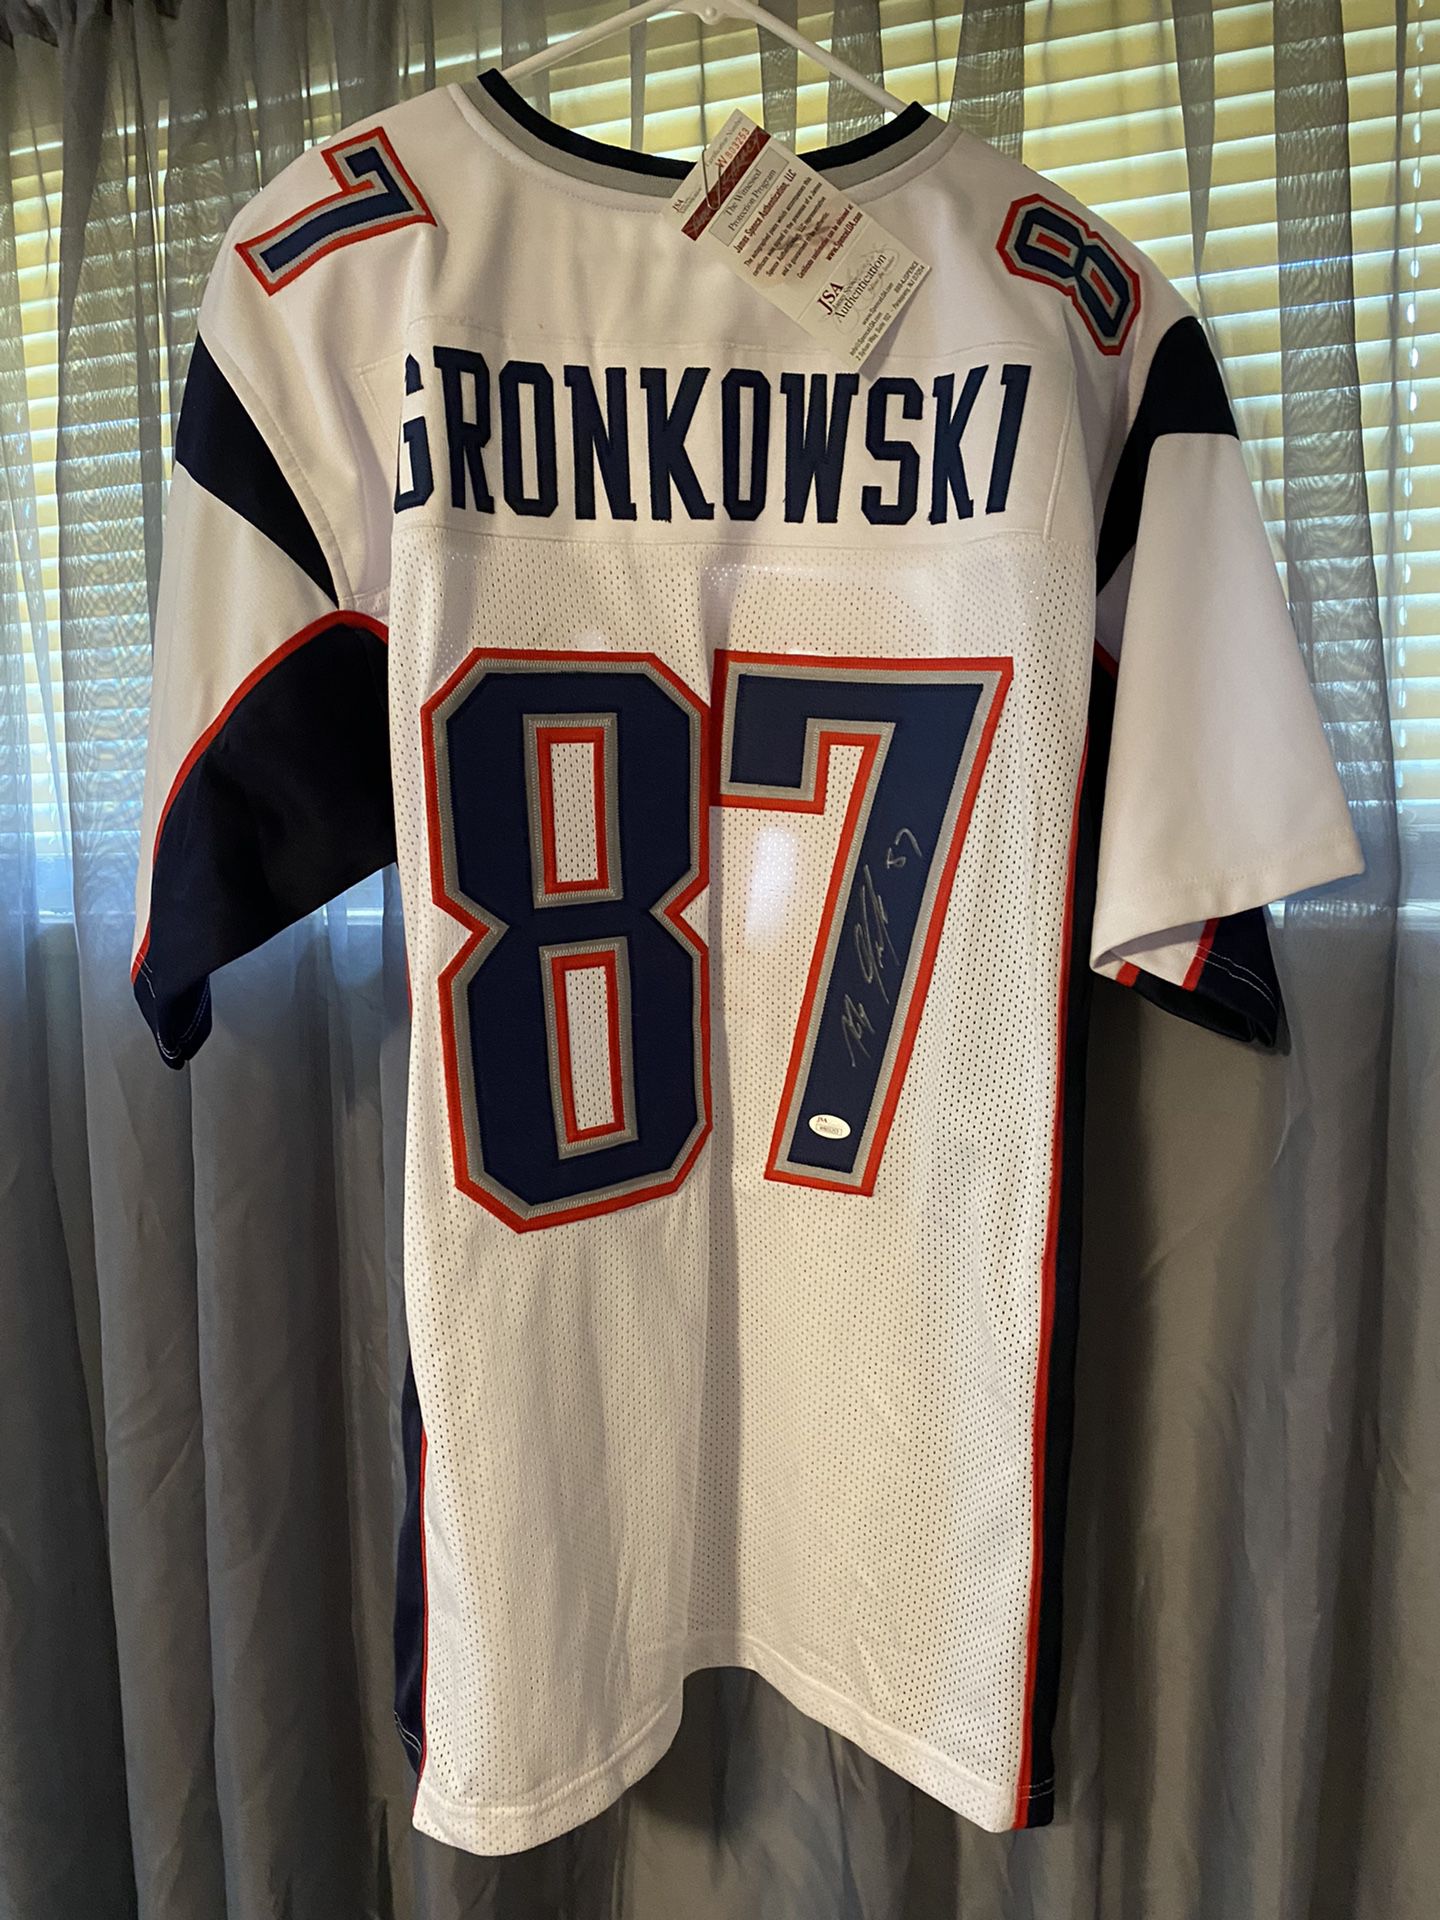 Rob Gronkowski Autographed New England Patriots Football Jersey Comes With COA 